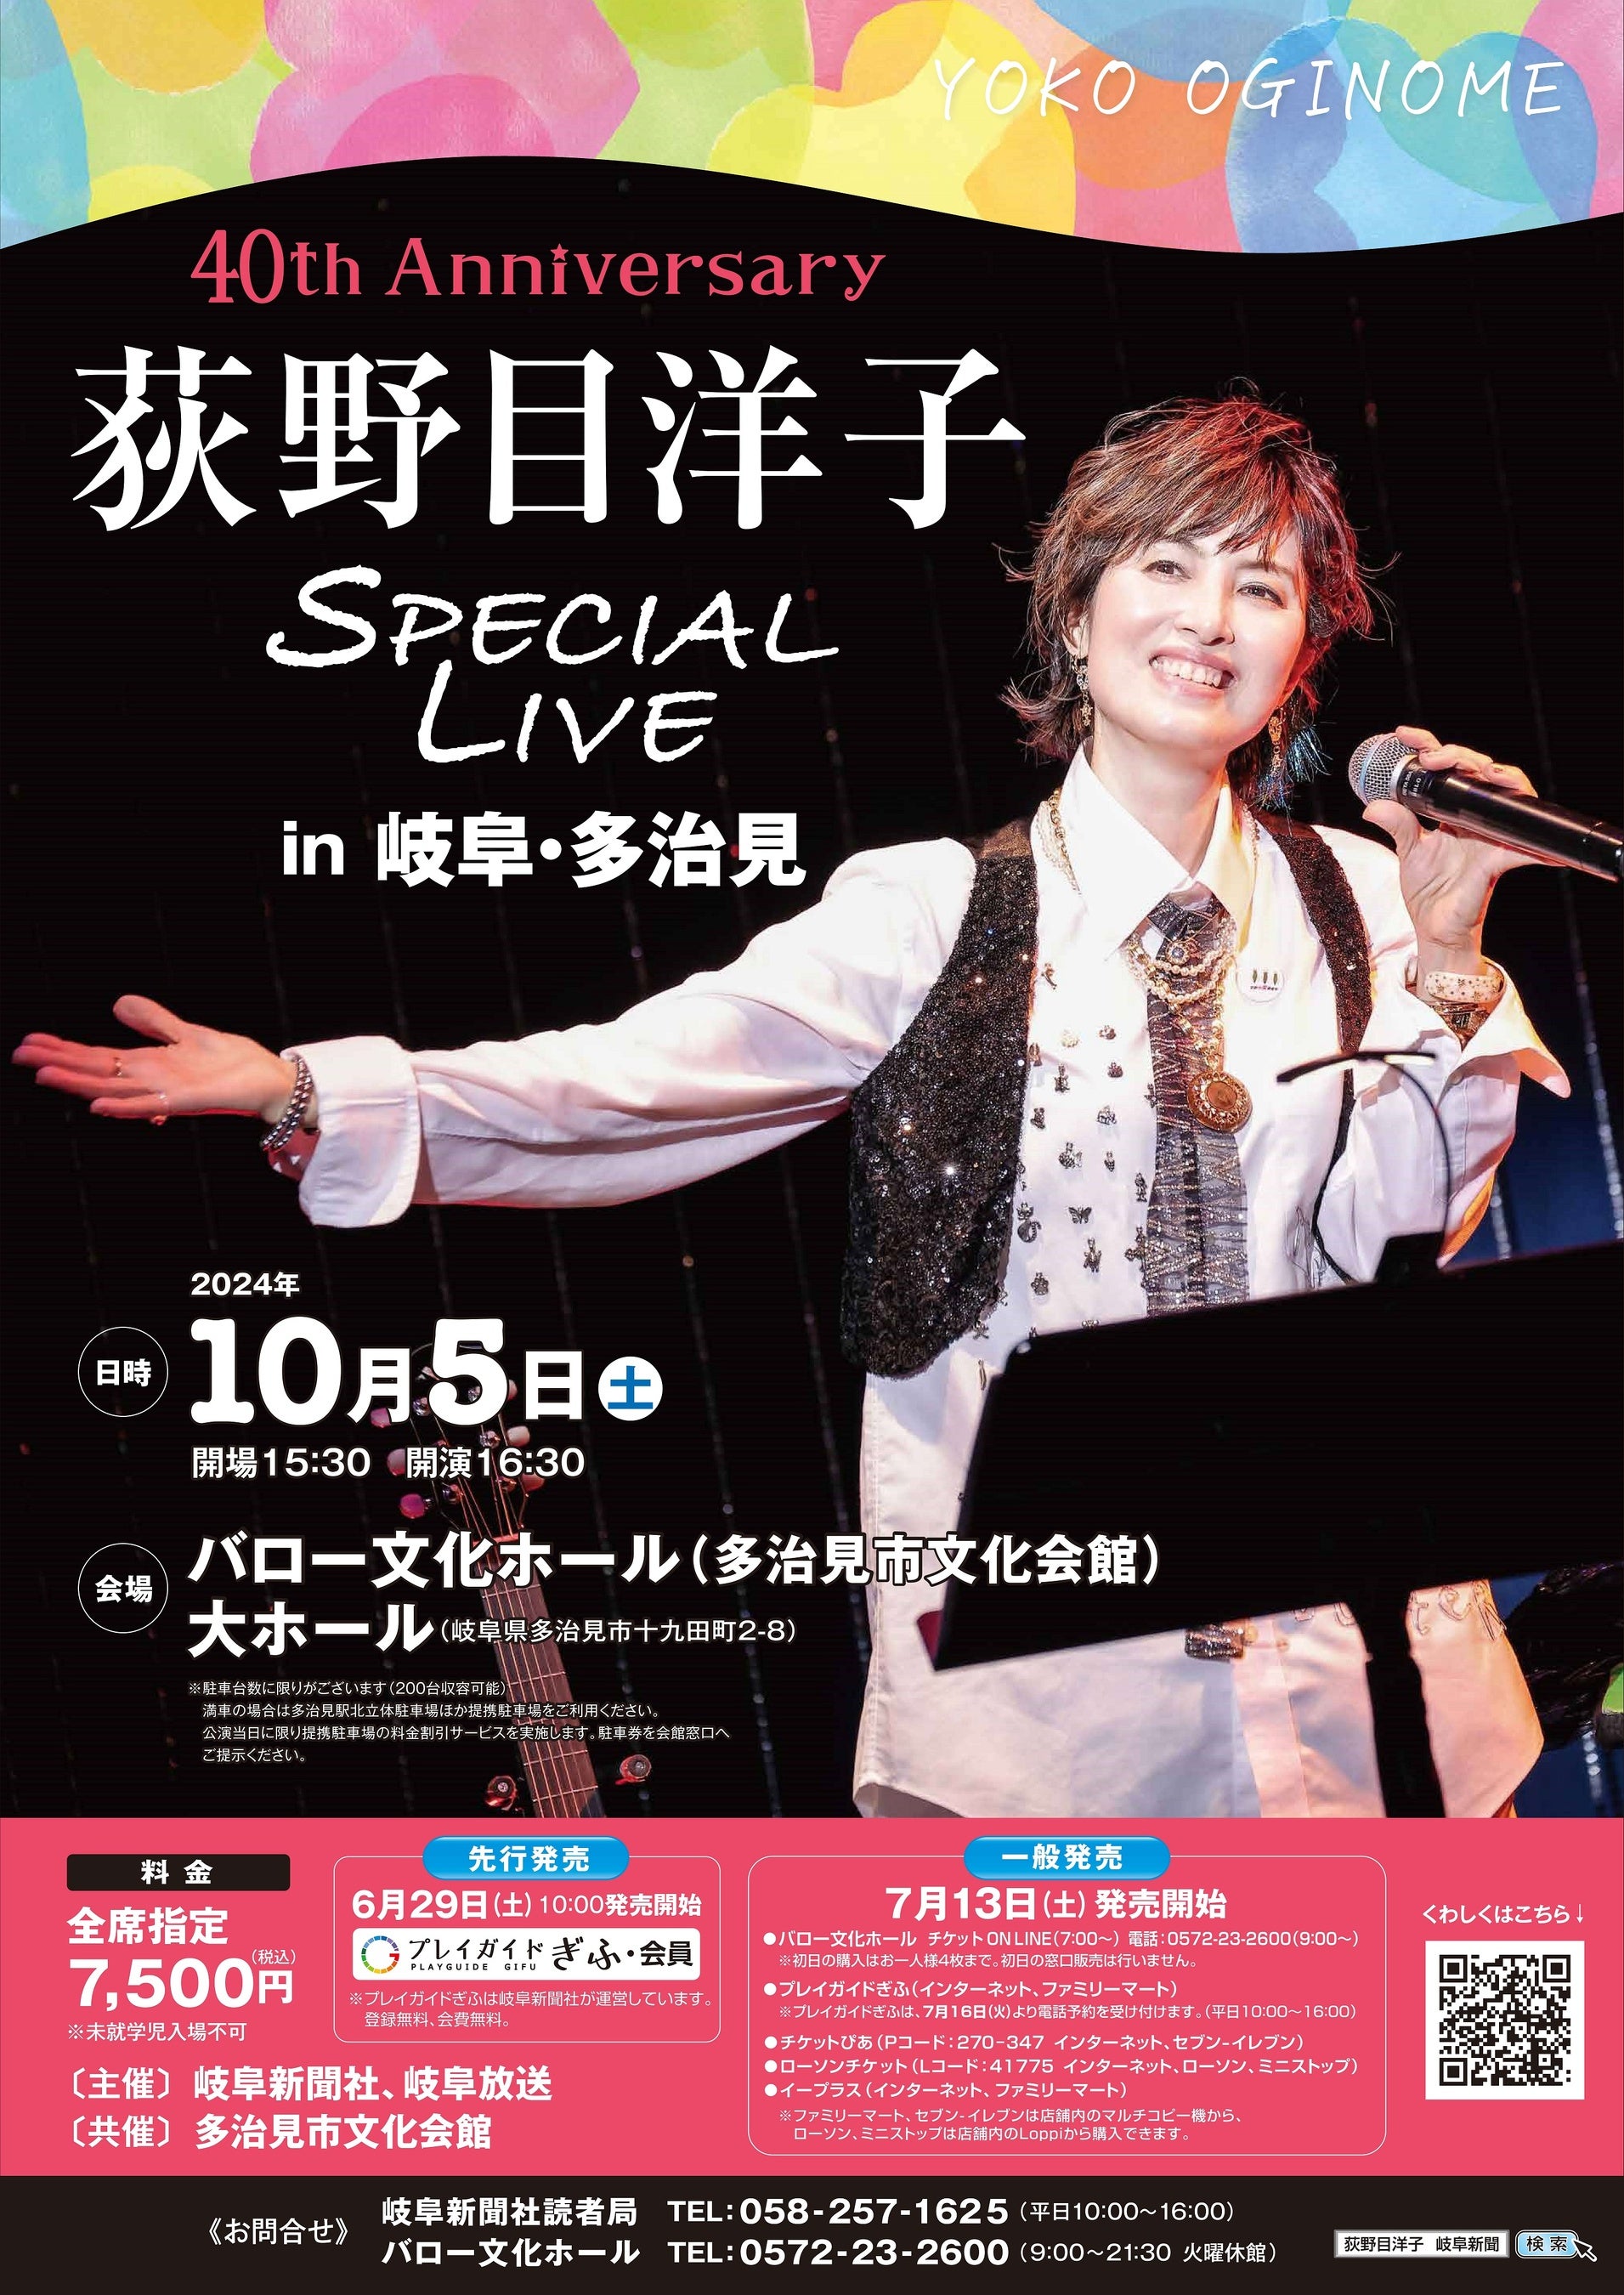 40th Anniversary 荻野目洋子 SPECIAL LIVE in 岐阜・多治見